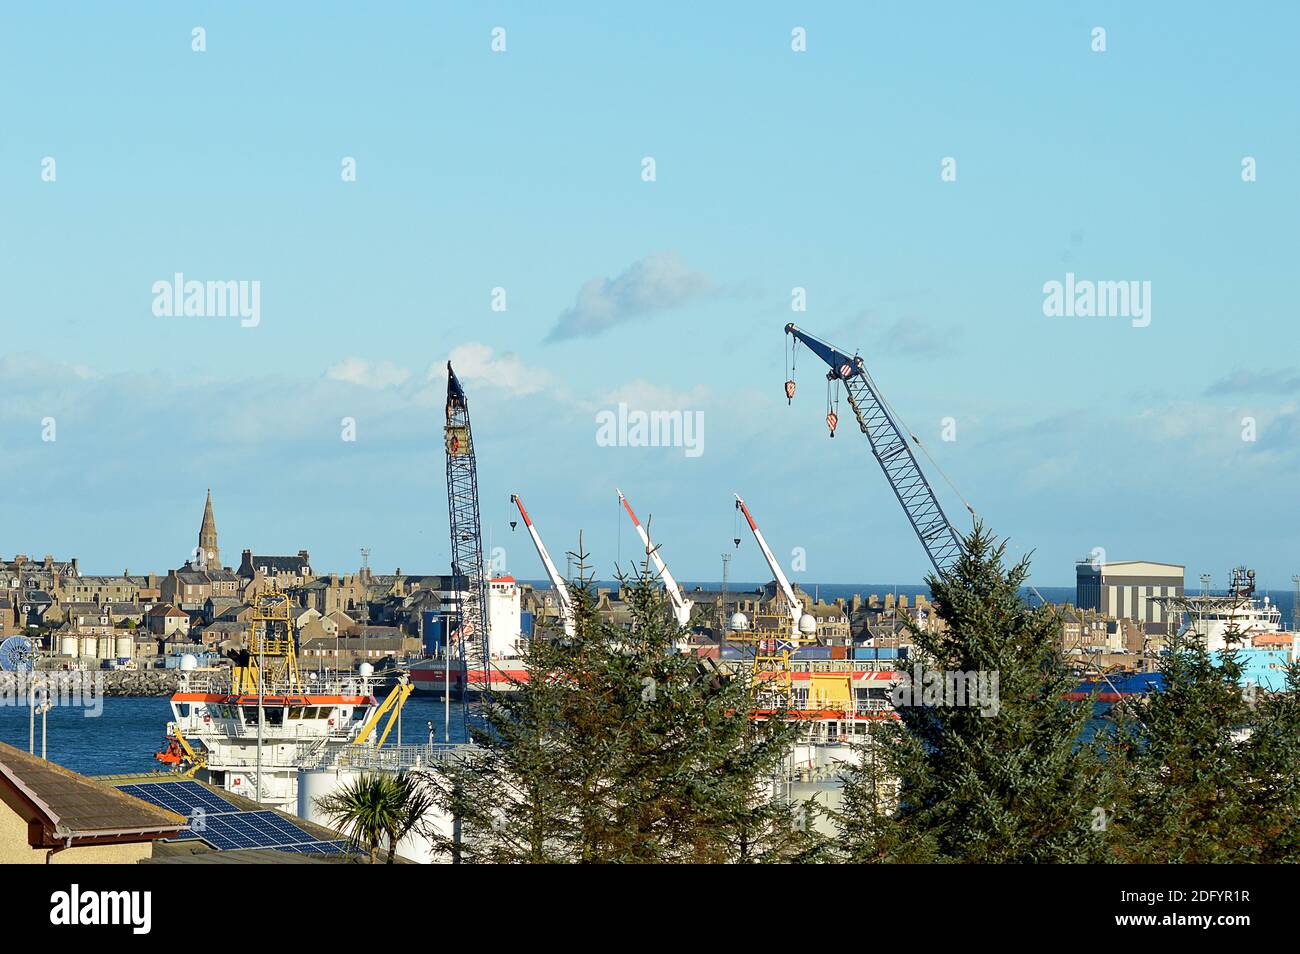 PETERHEAD, SCOTLAND - 21 NOVEMBER 2020: A view of the town of Peterhead, Abetdeenshire, Europe's largest fishmarket and a major North Sea oil base. Stock Photo